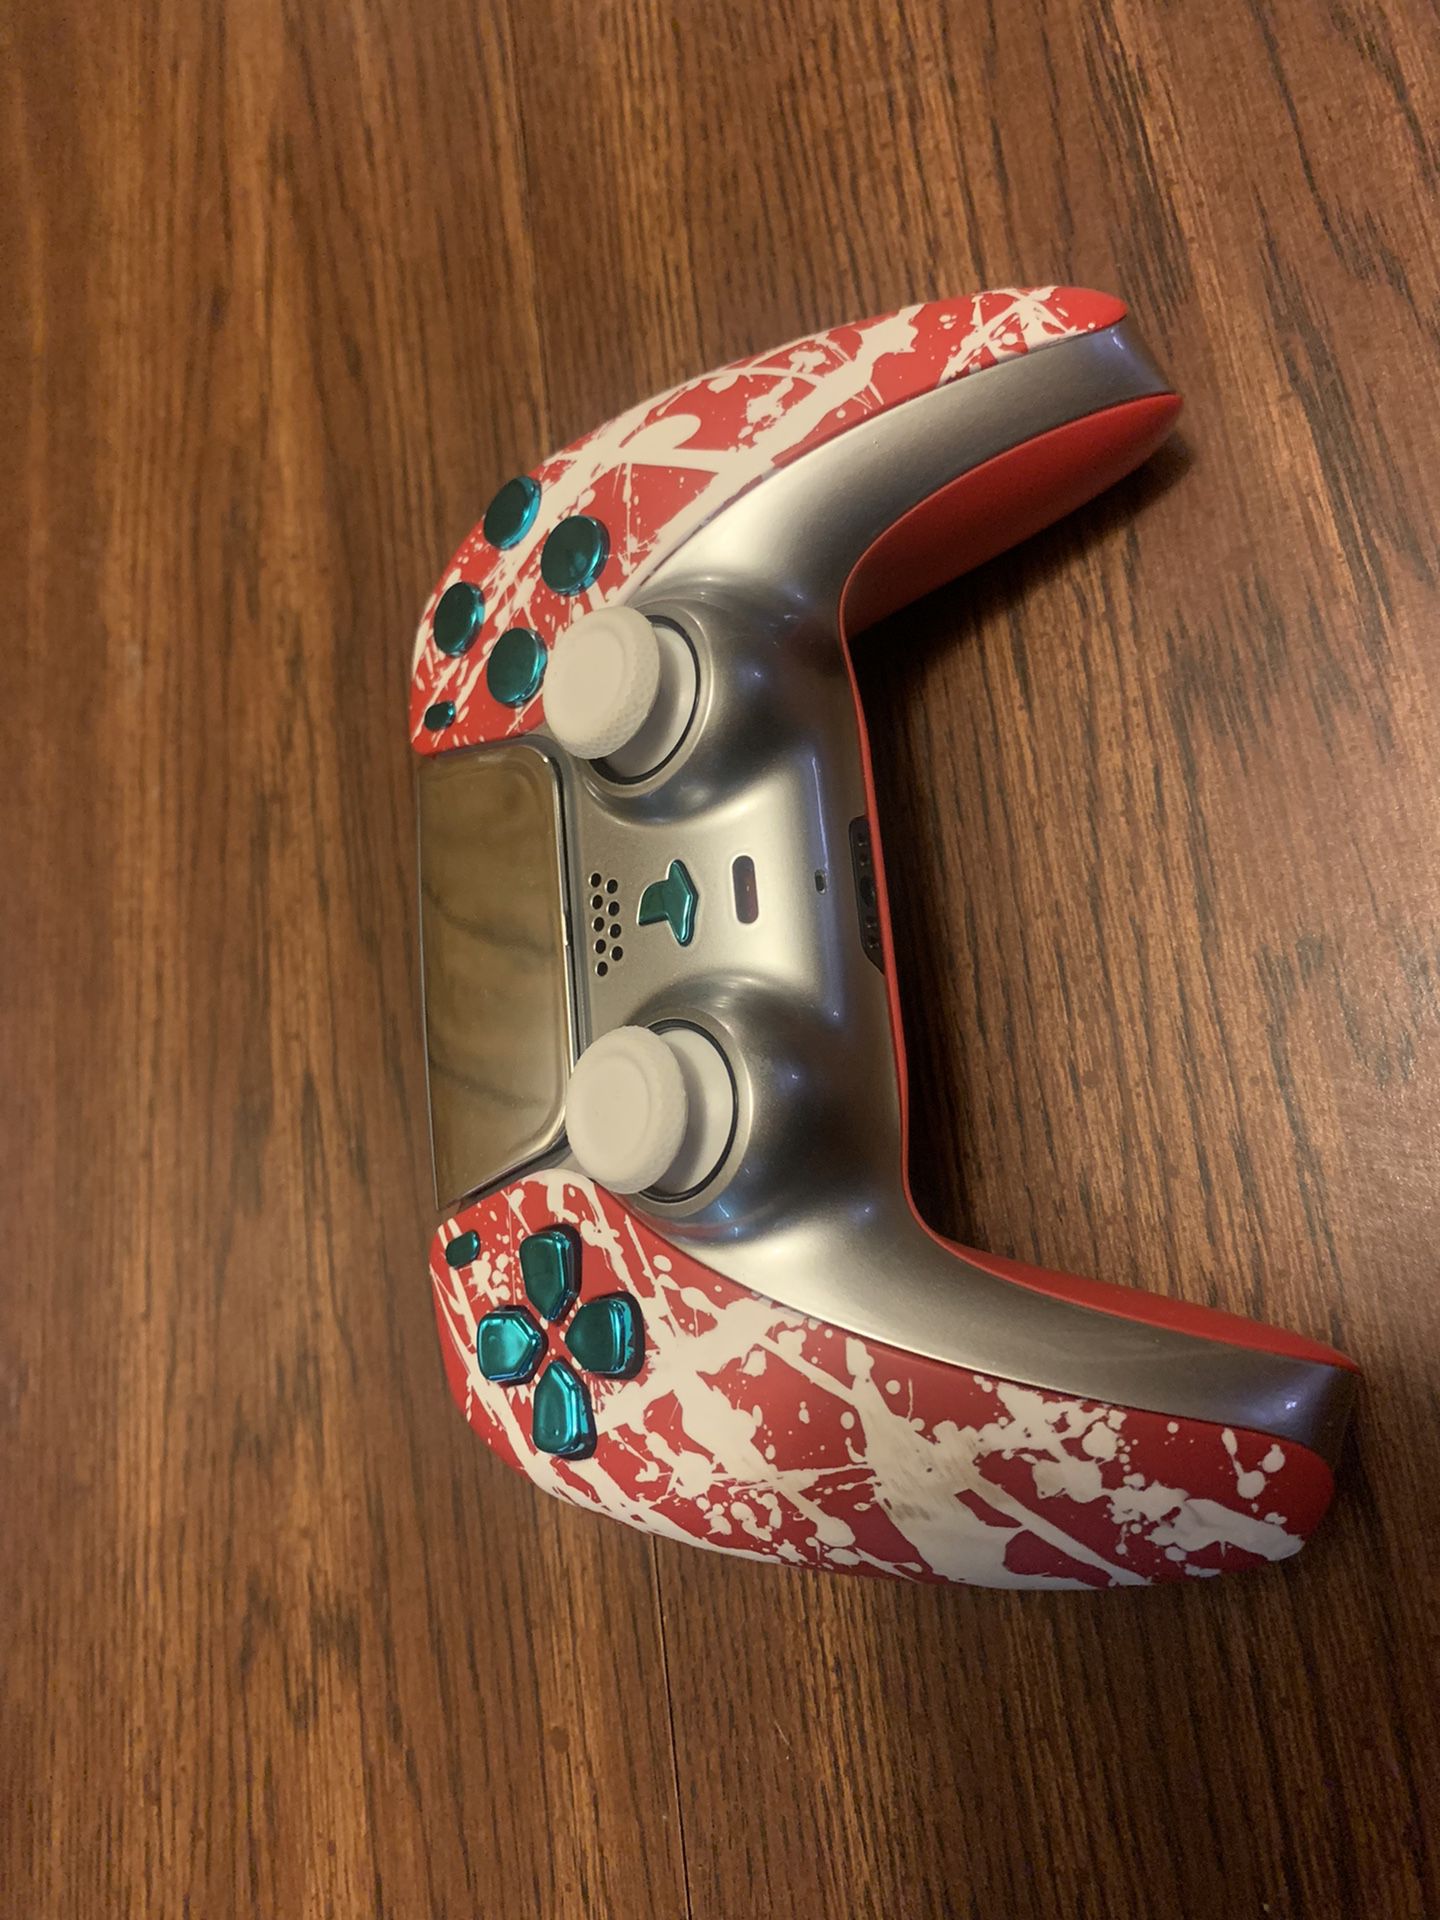 Customized Ps4 Controller. 